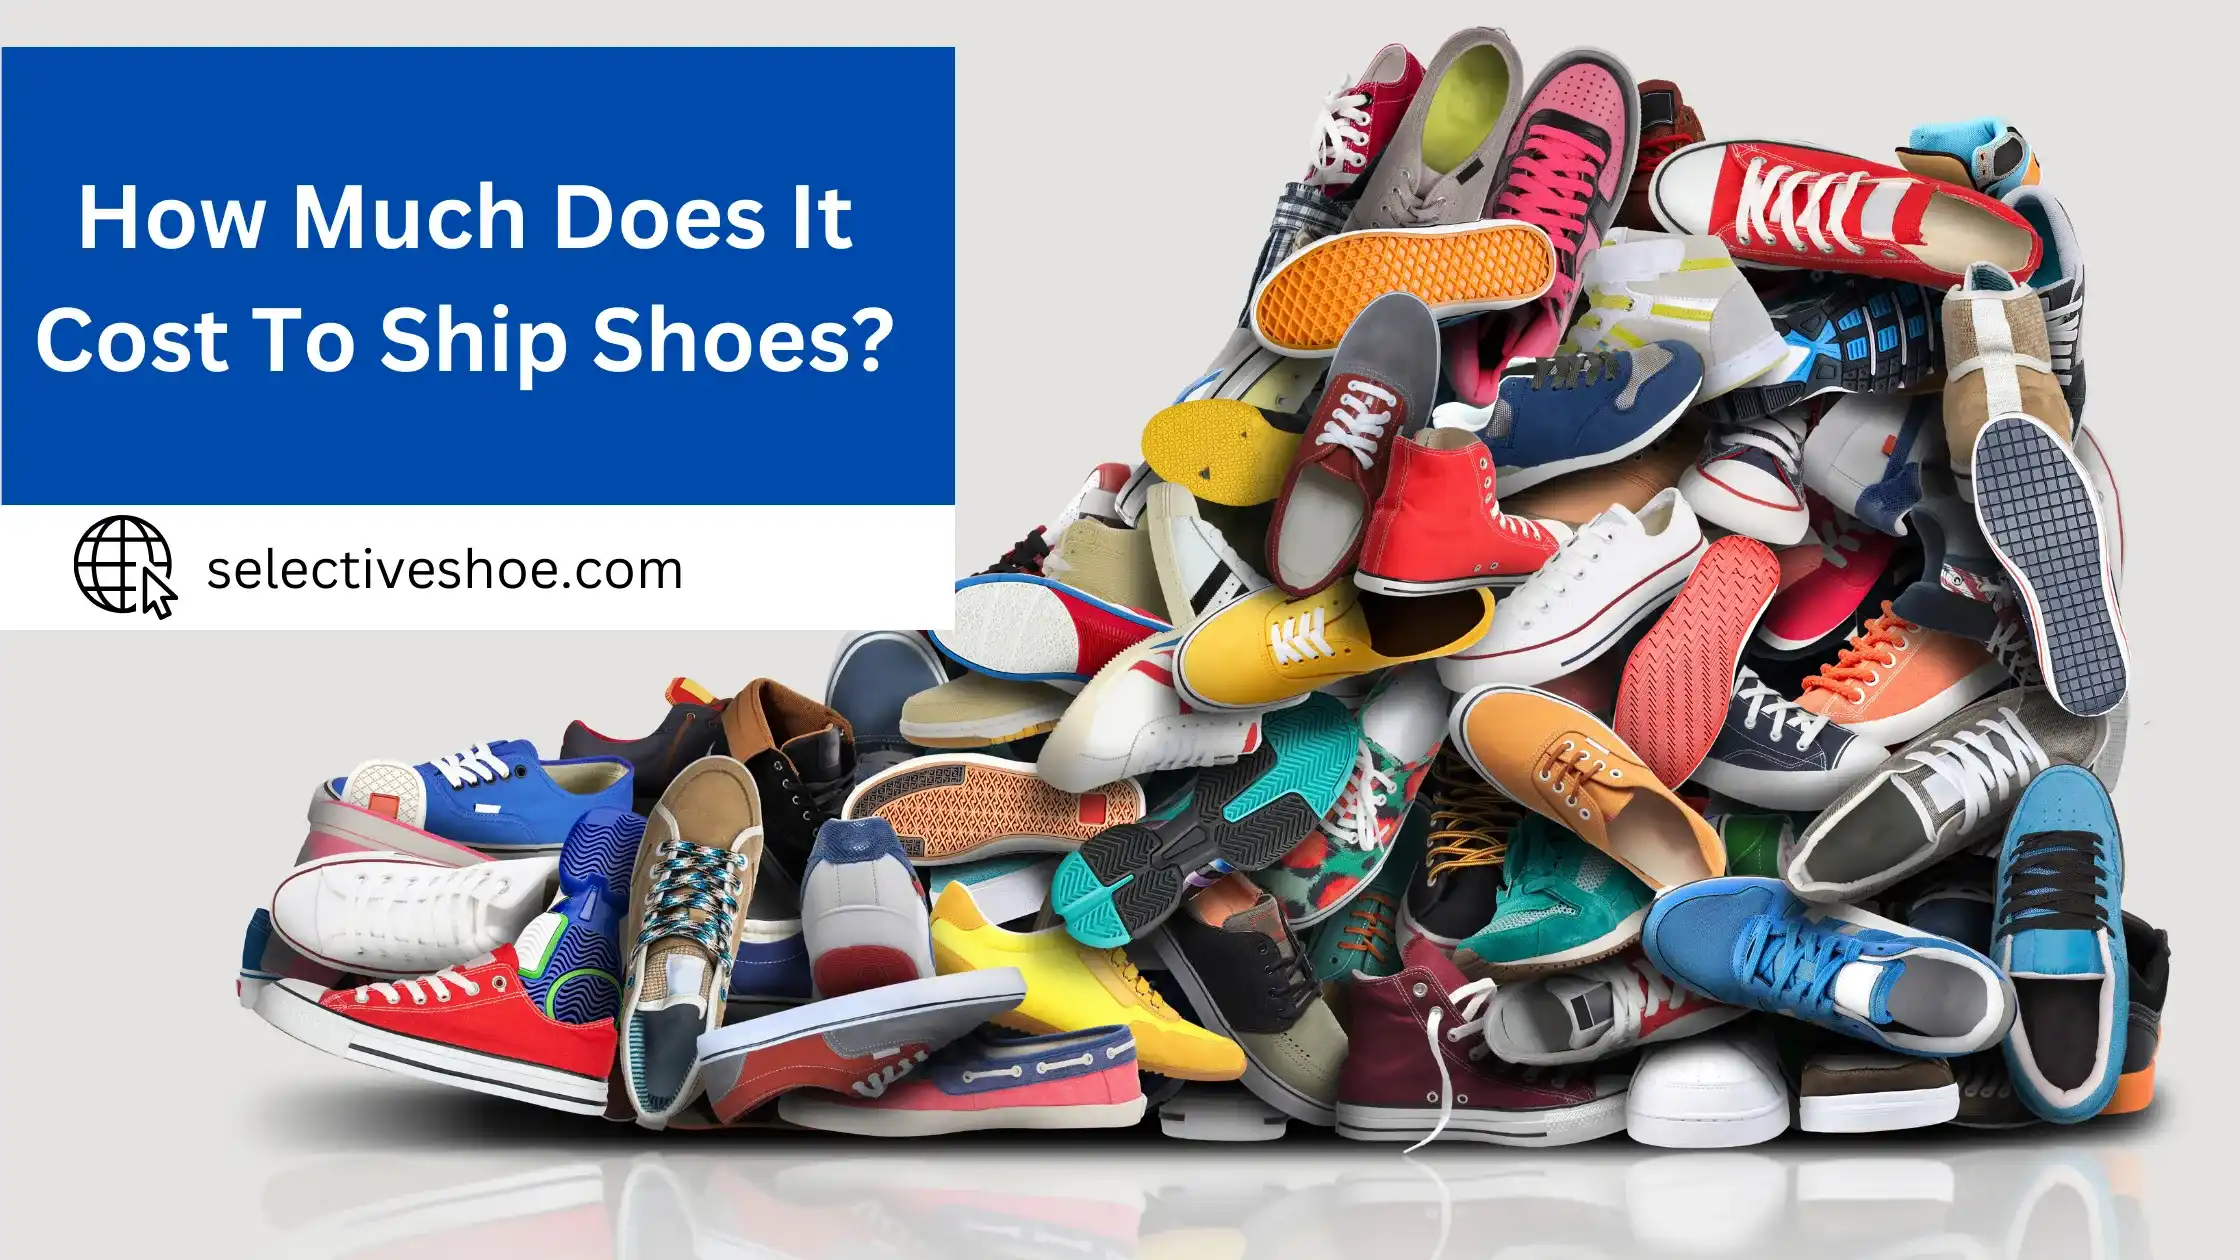 How Much Does It Cost To Ship Shoes? Detailed Information